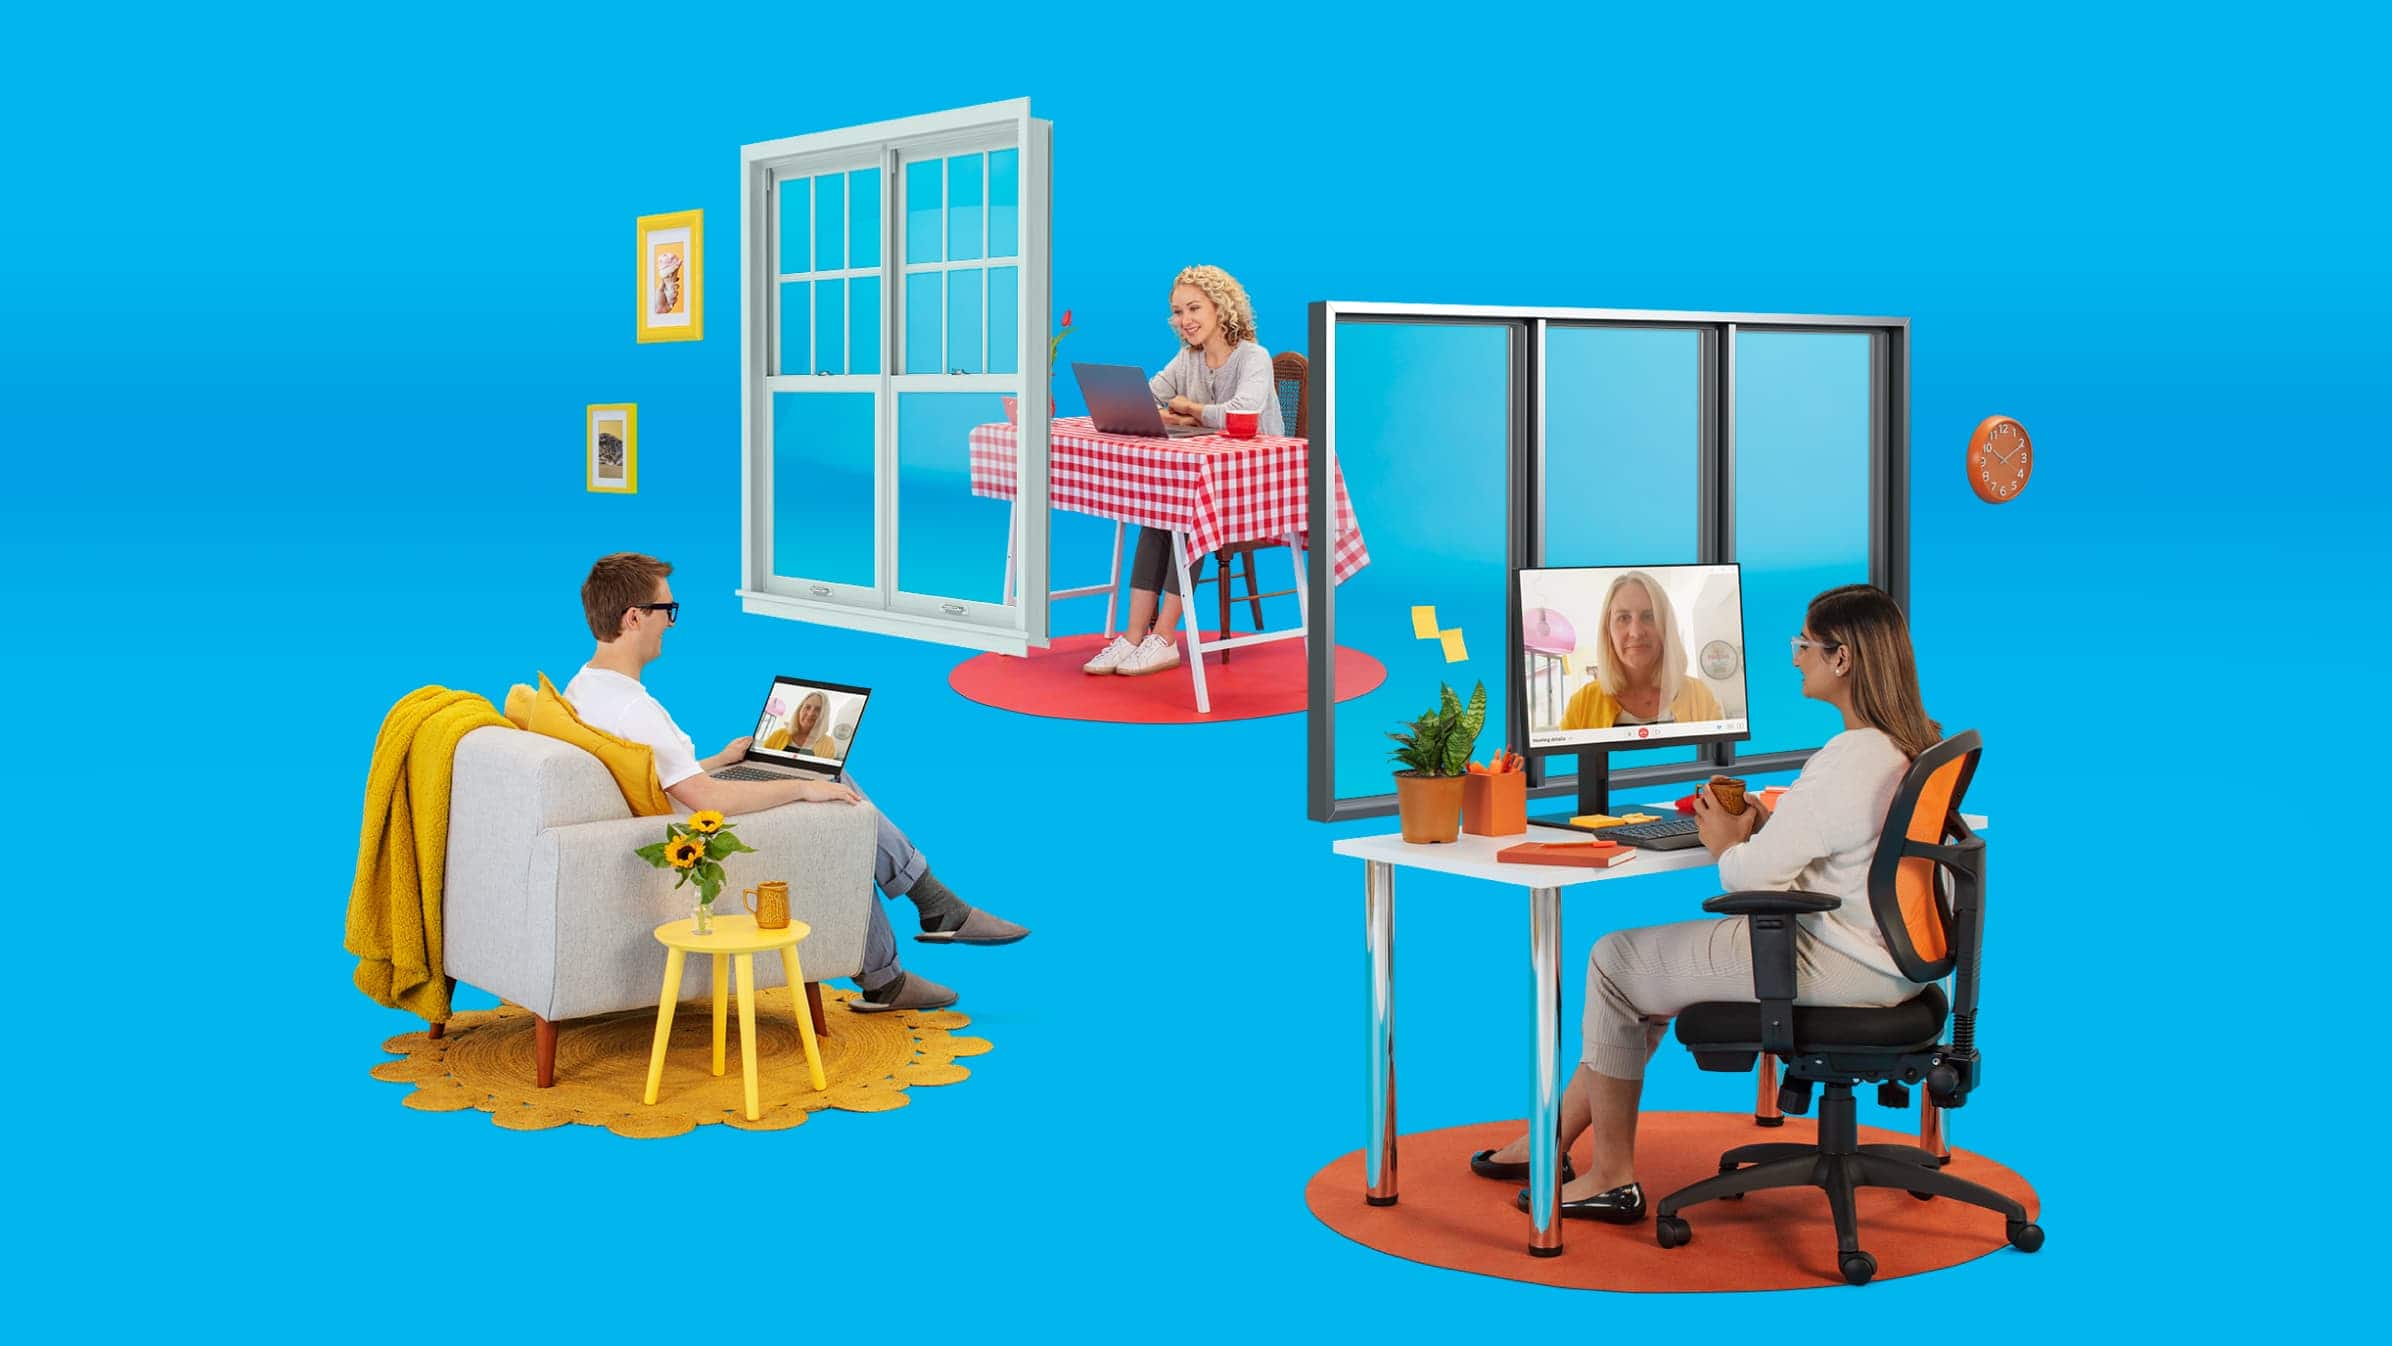 Three scenes on blue background of people working at computers; one at a desk, one at a dining table, one in an armchair.